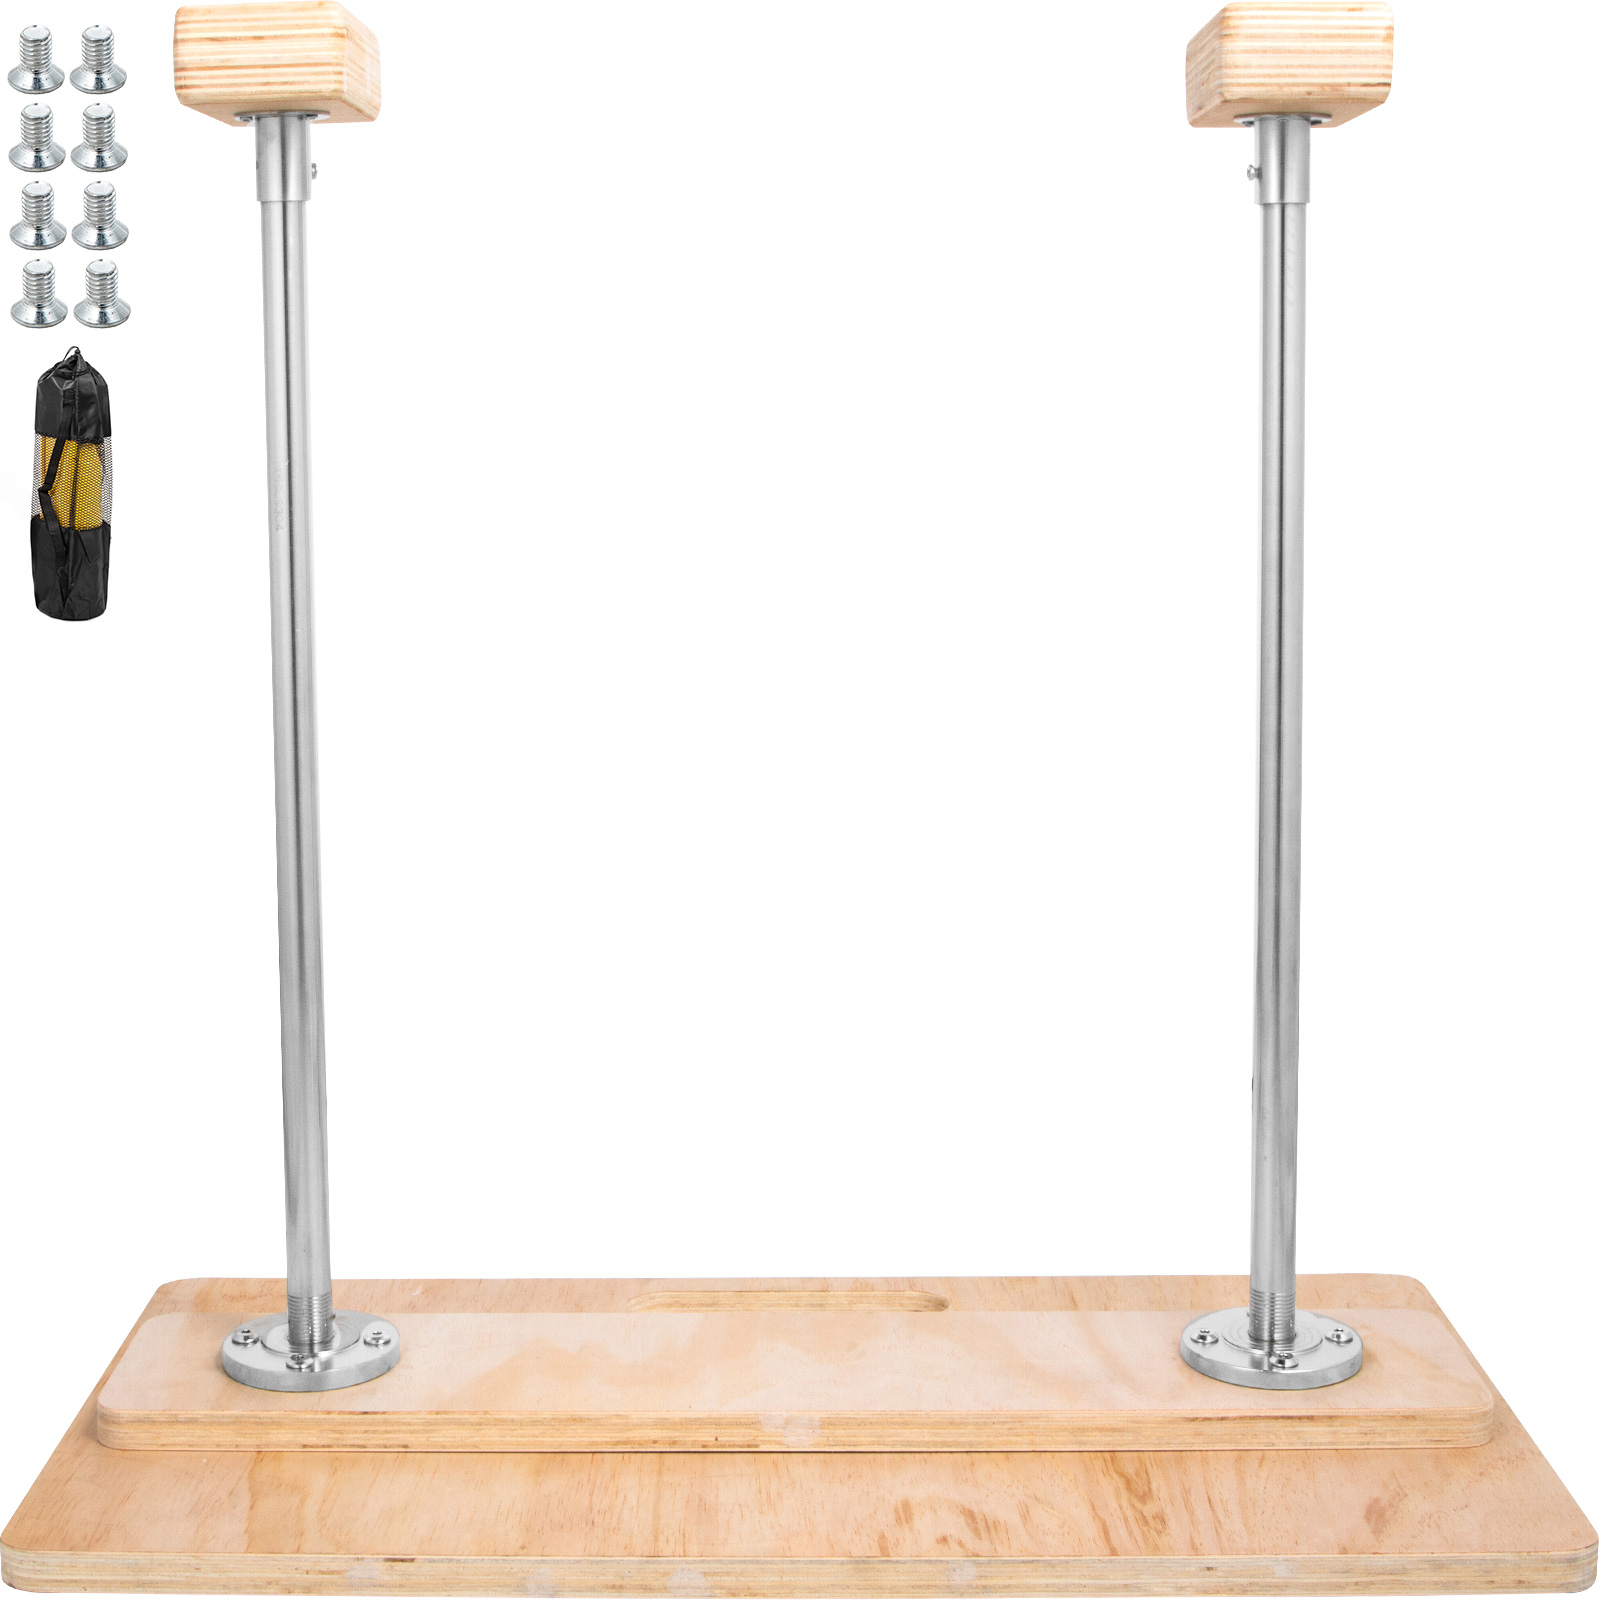 Fixed Handstand Canes 18" Yoga Inversion Bench 16"x23" Feet Up Rectangular Block 